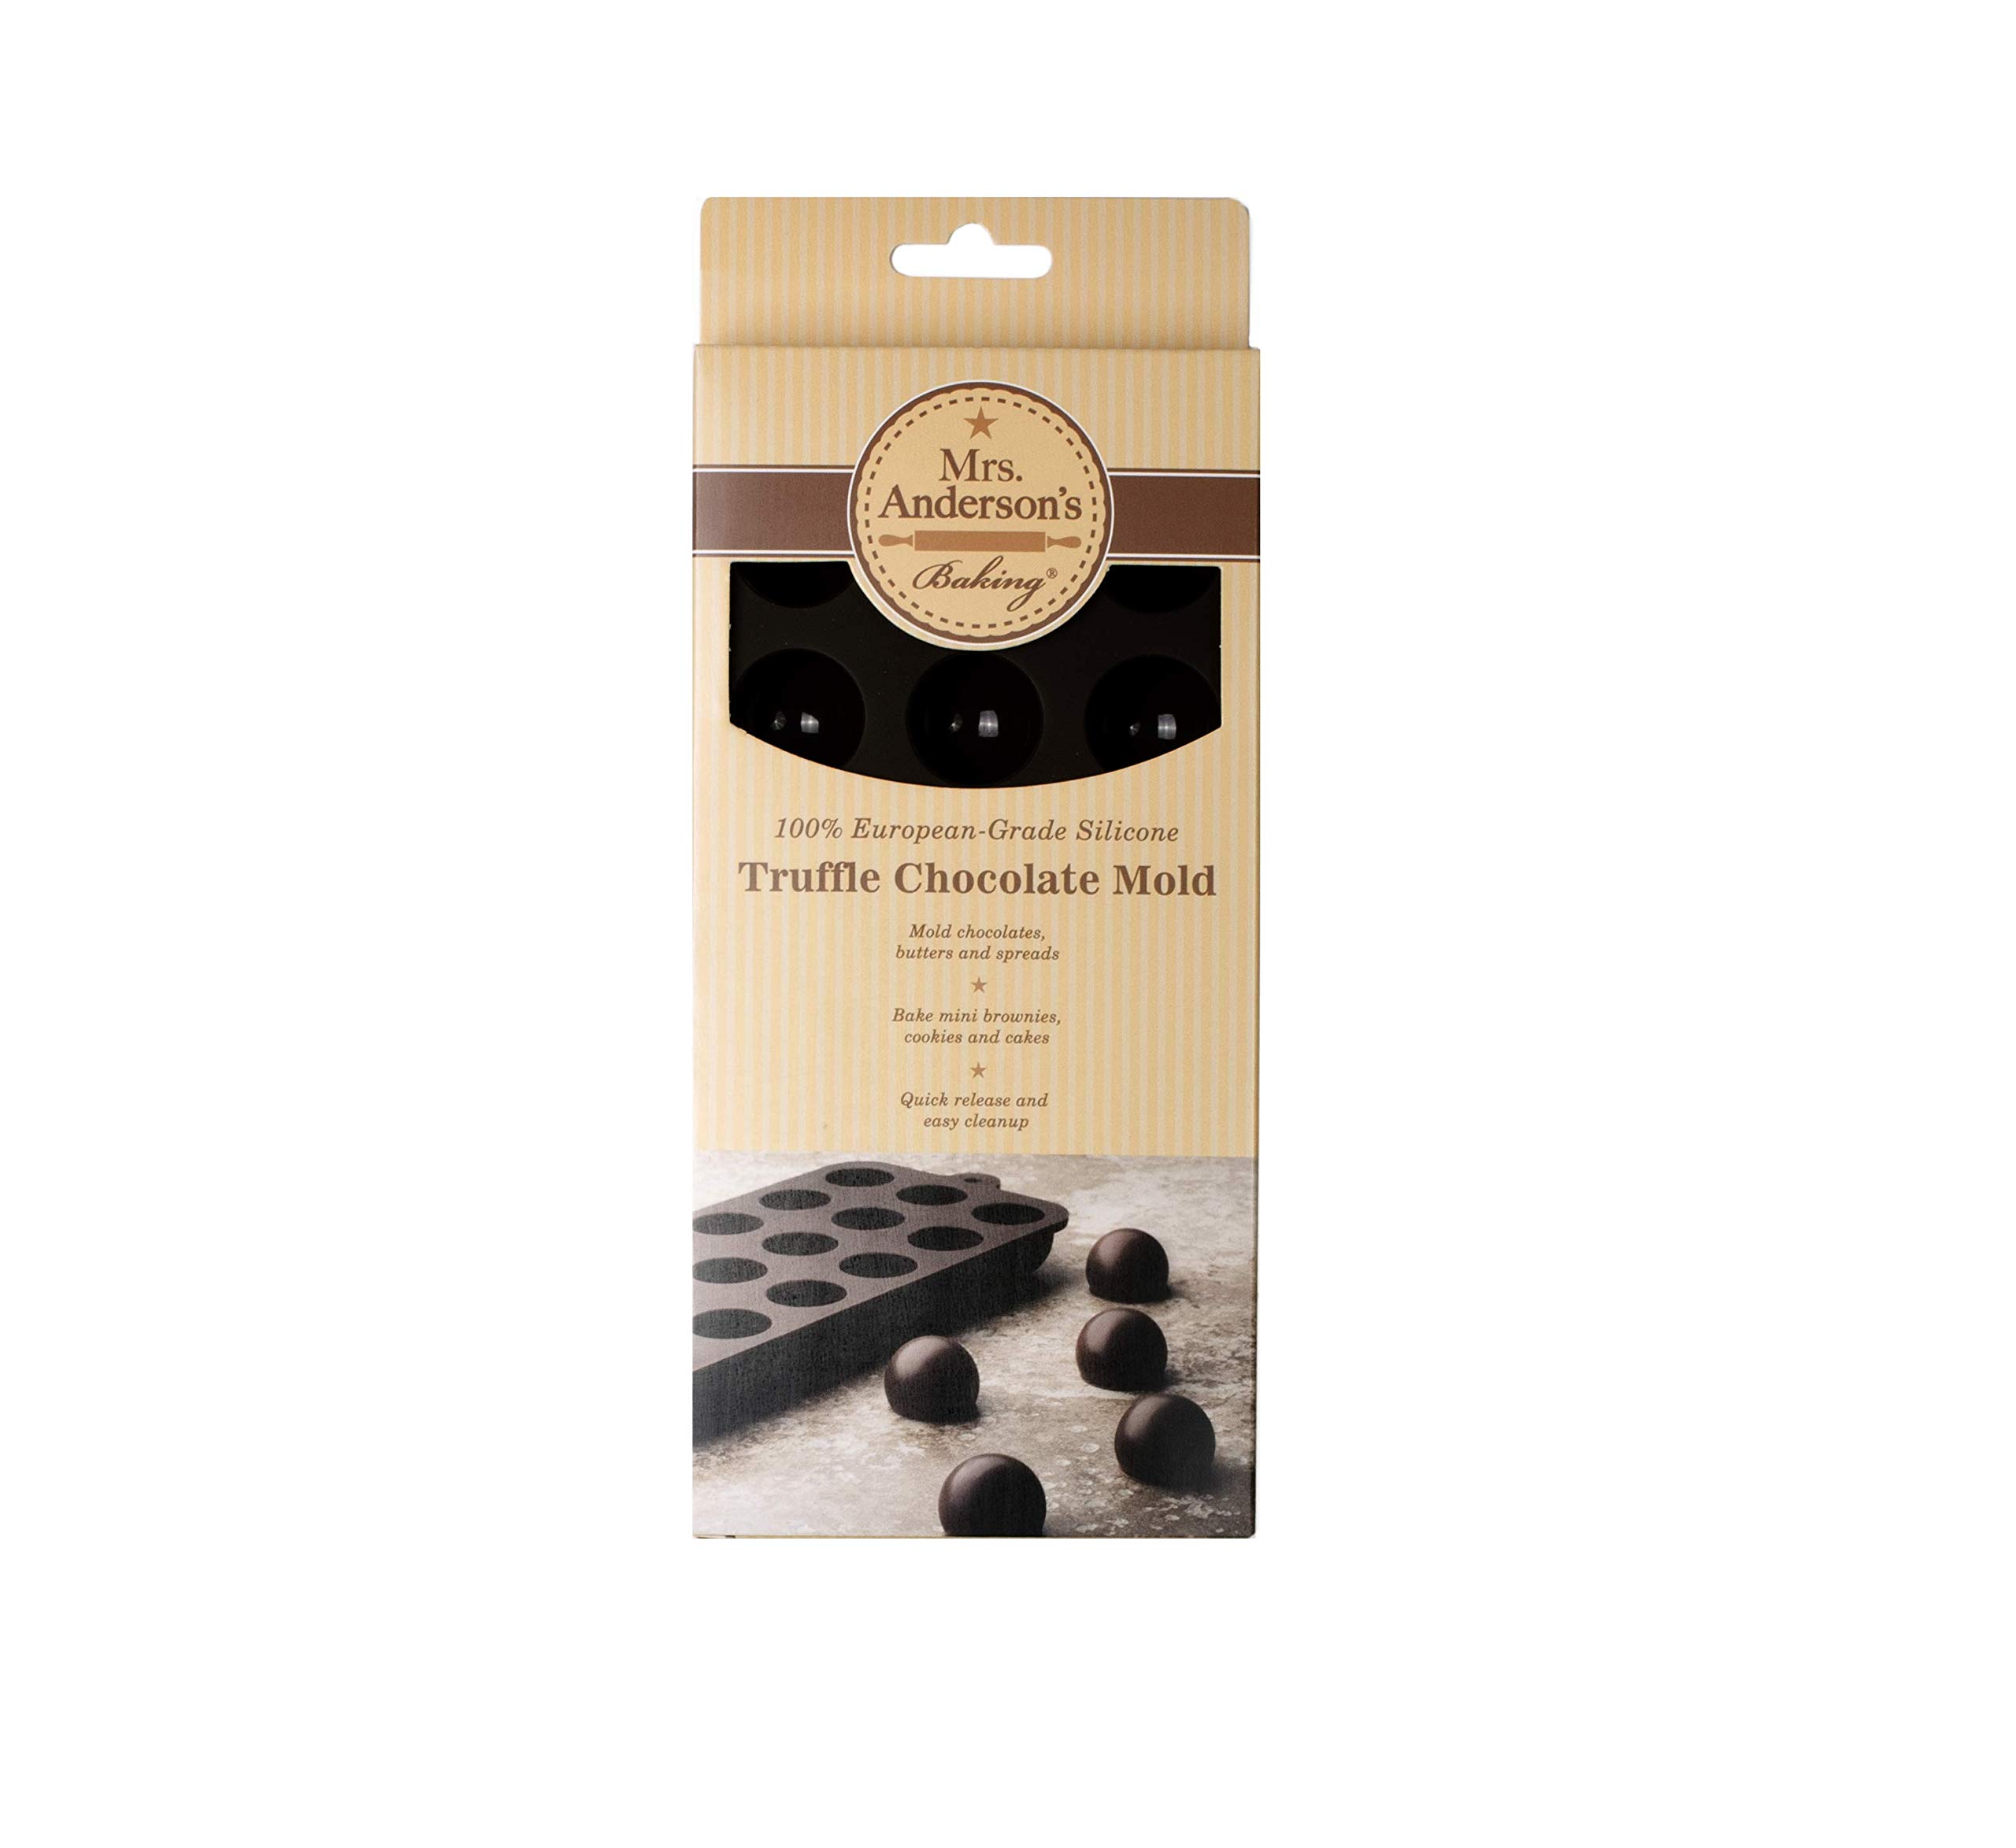 Mrs. Anderson's Baking Mrs Andersons Baking chocolate Mold, Truffle, European-grade Silicone